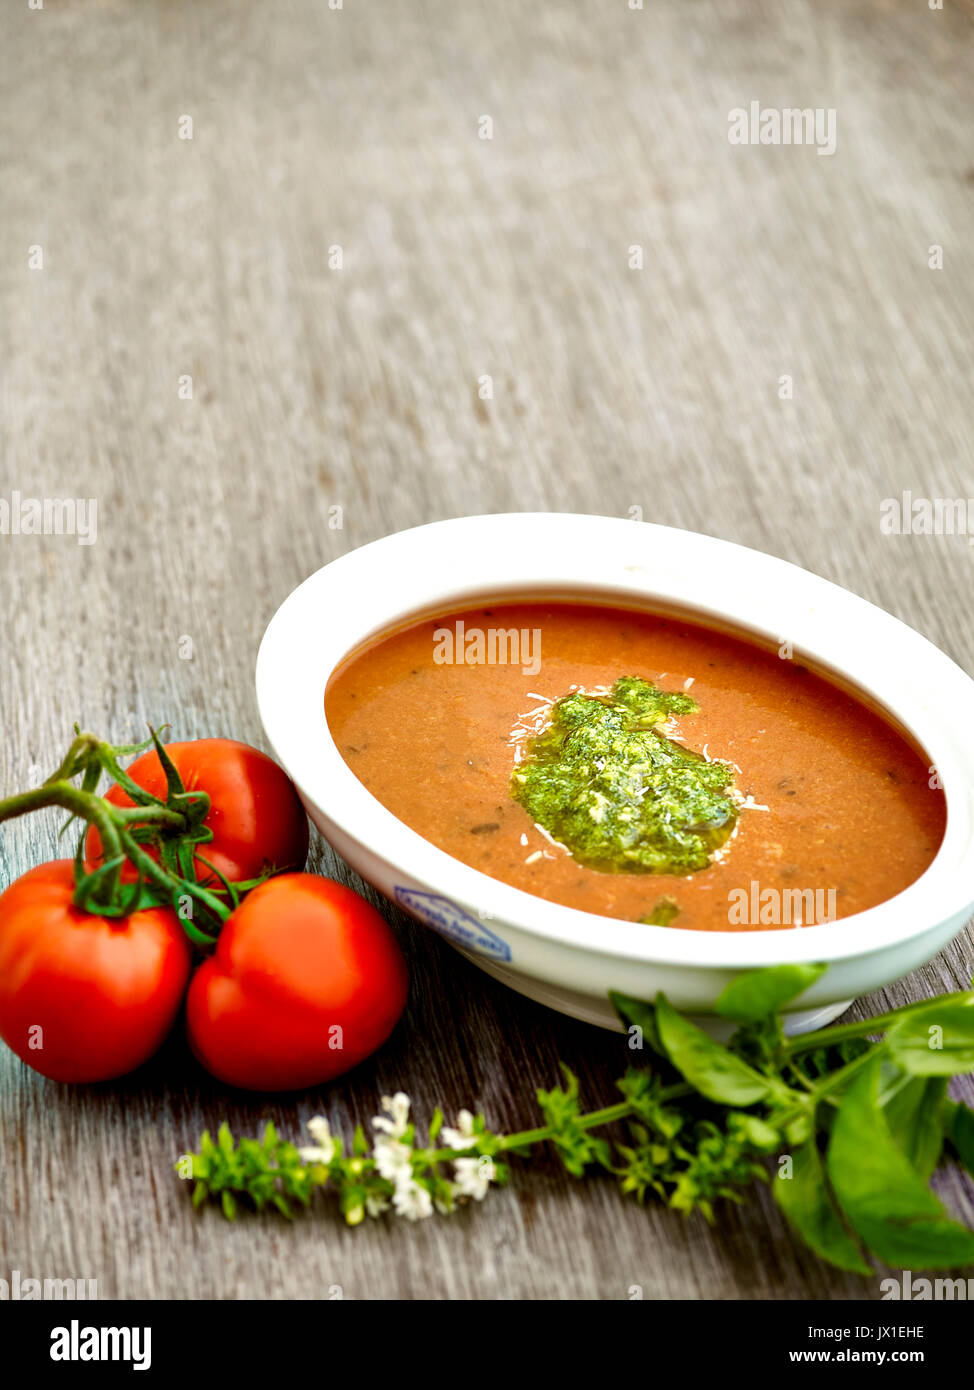 Rustic roasted tomato and basil soup Stock Photo